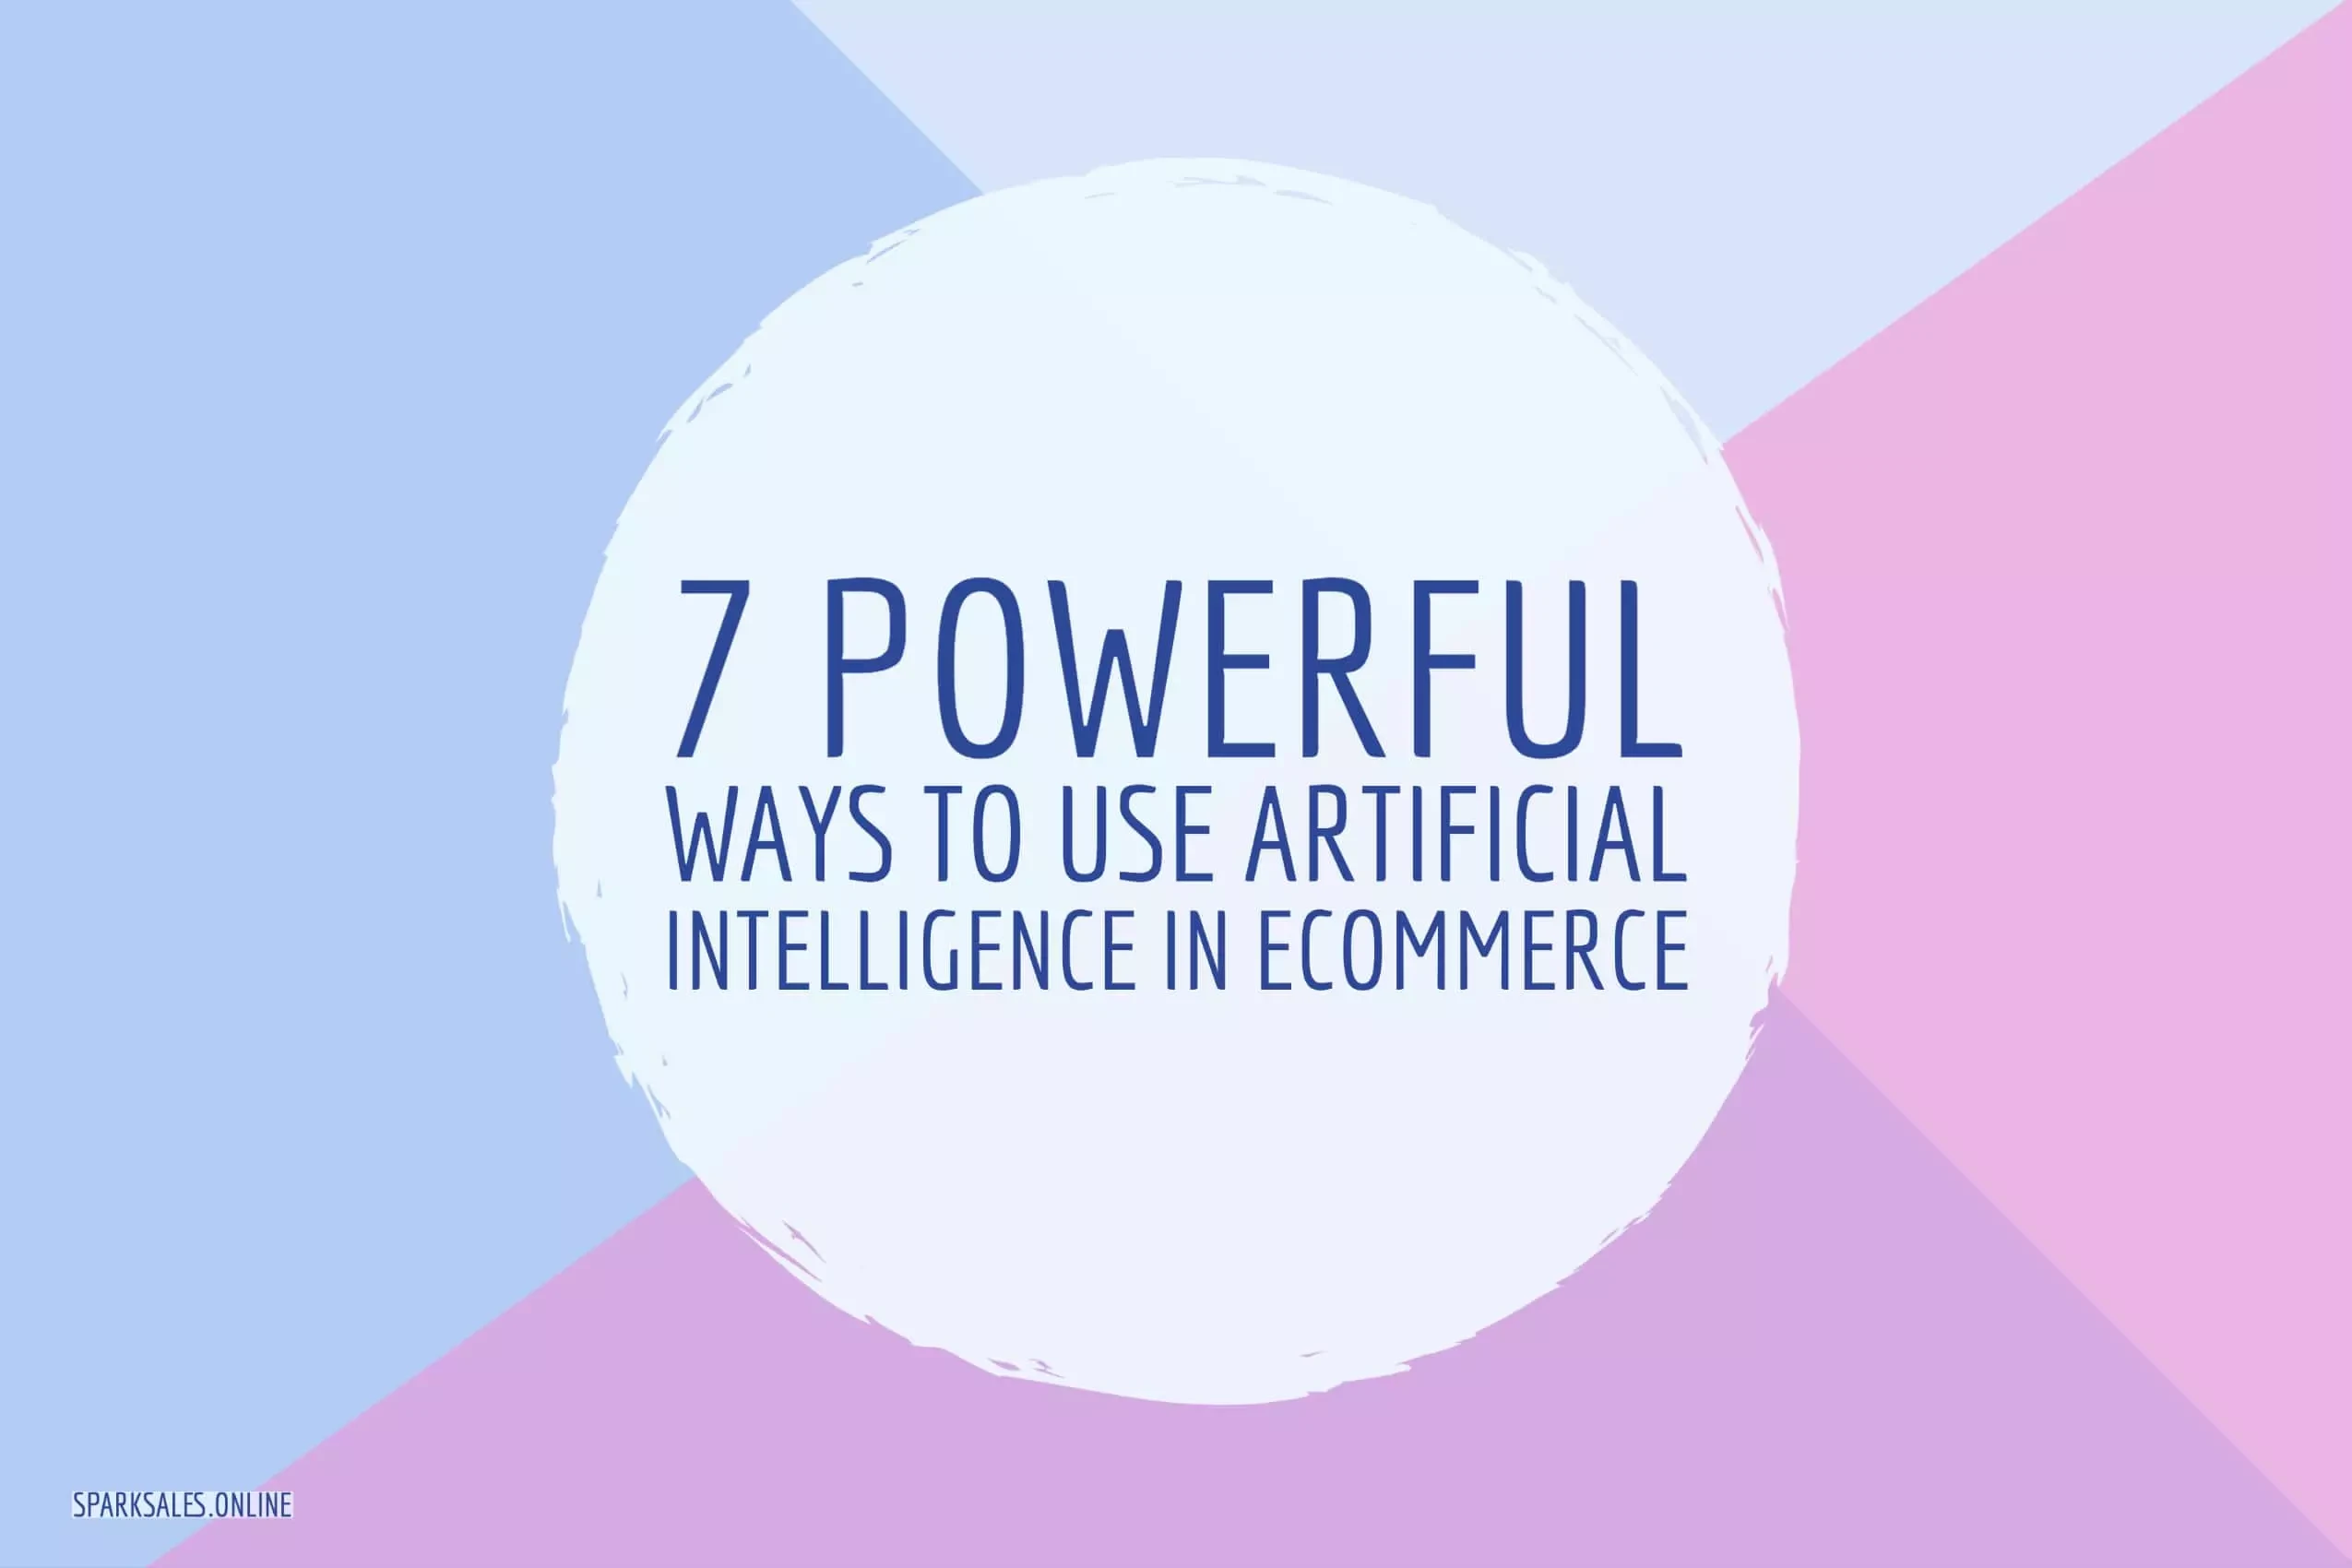 7 Powerful Ways To Use Artificial Intelligence In eCommerce